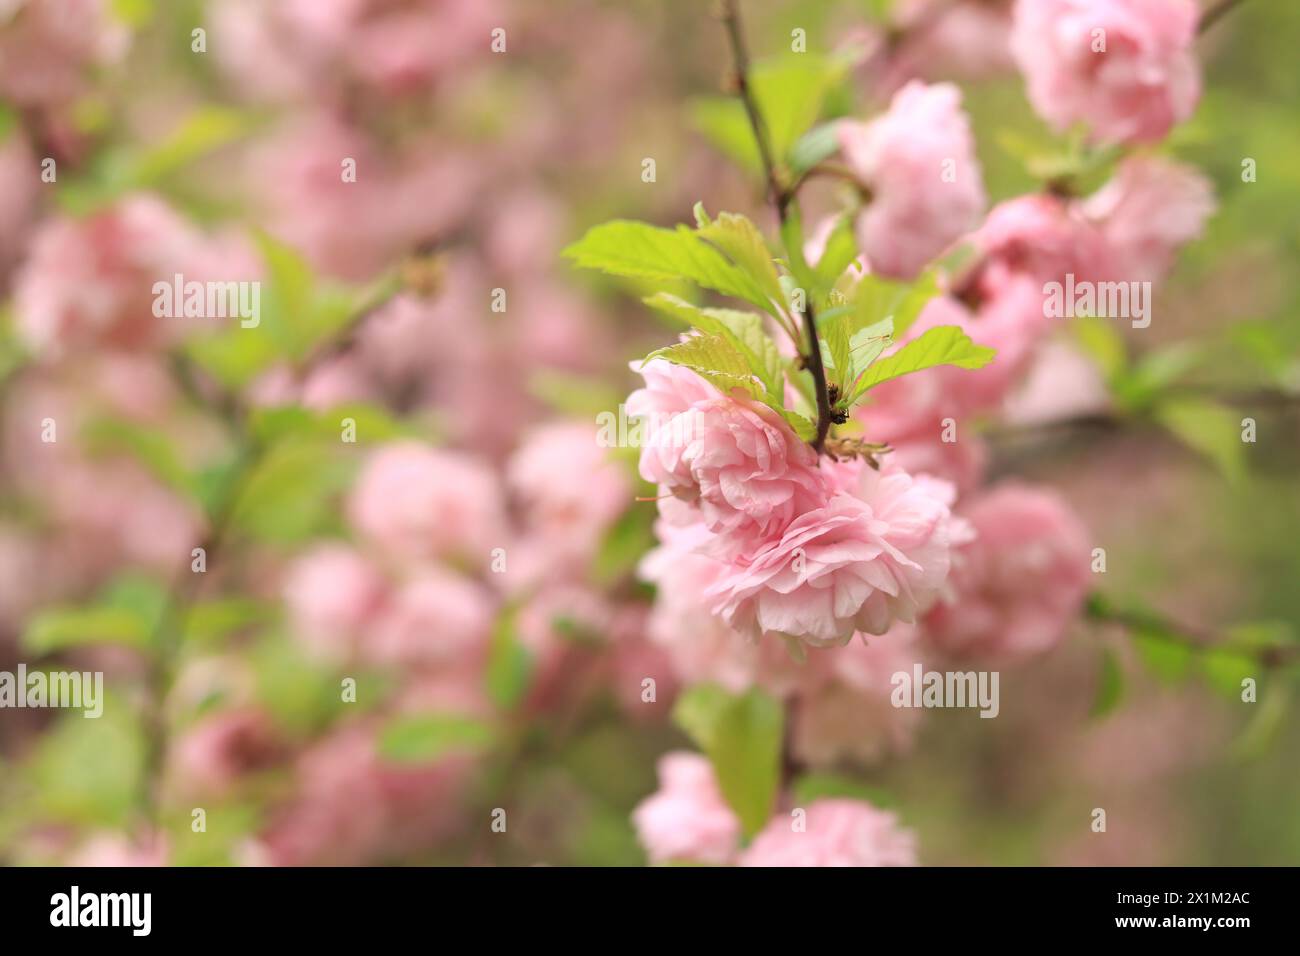 Prunus triloba Plena. Beautiful pink flowers on a bush branch close-up. Flowers with selective focus, natural background Stock Photo